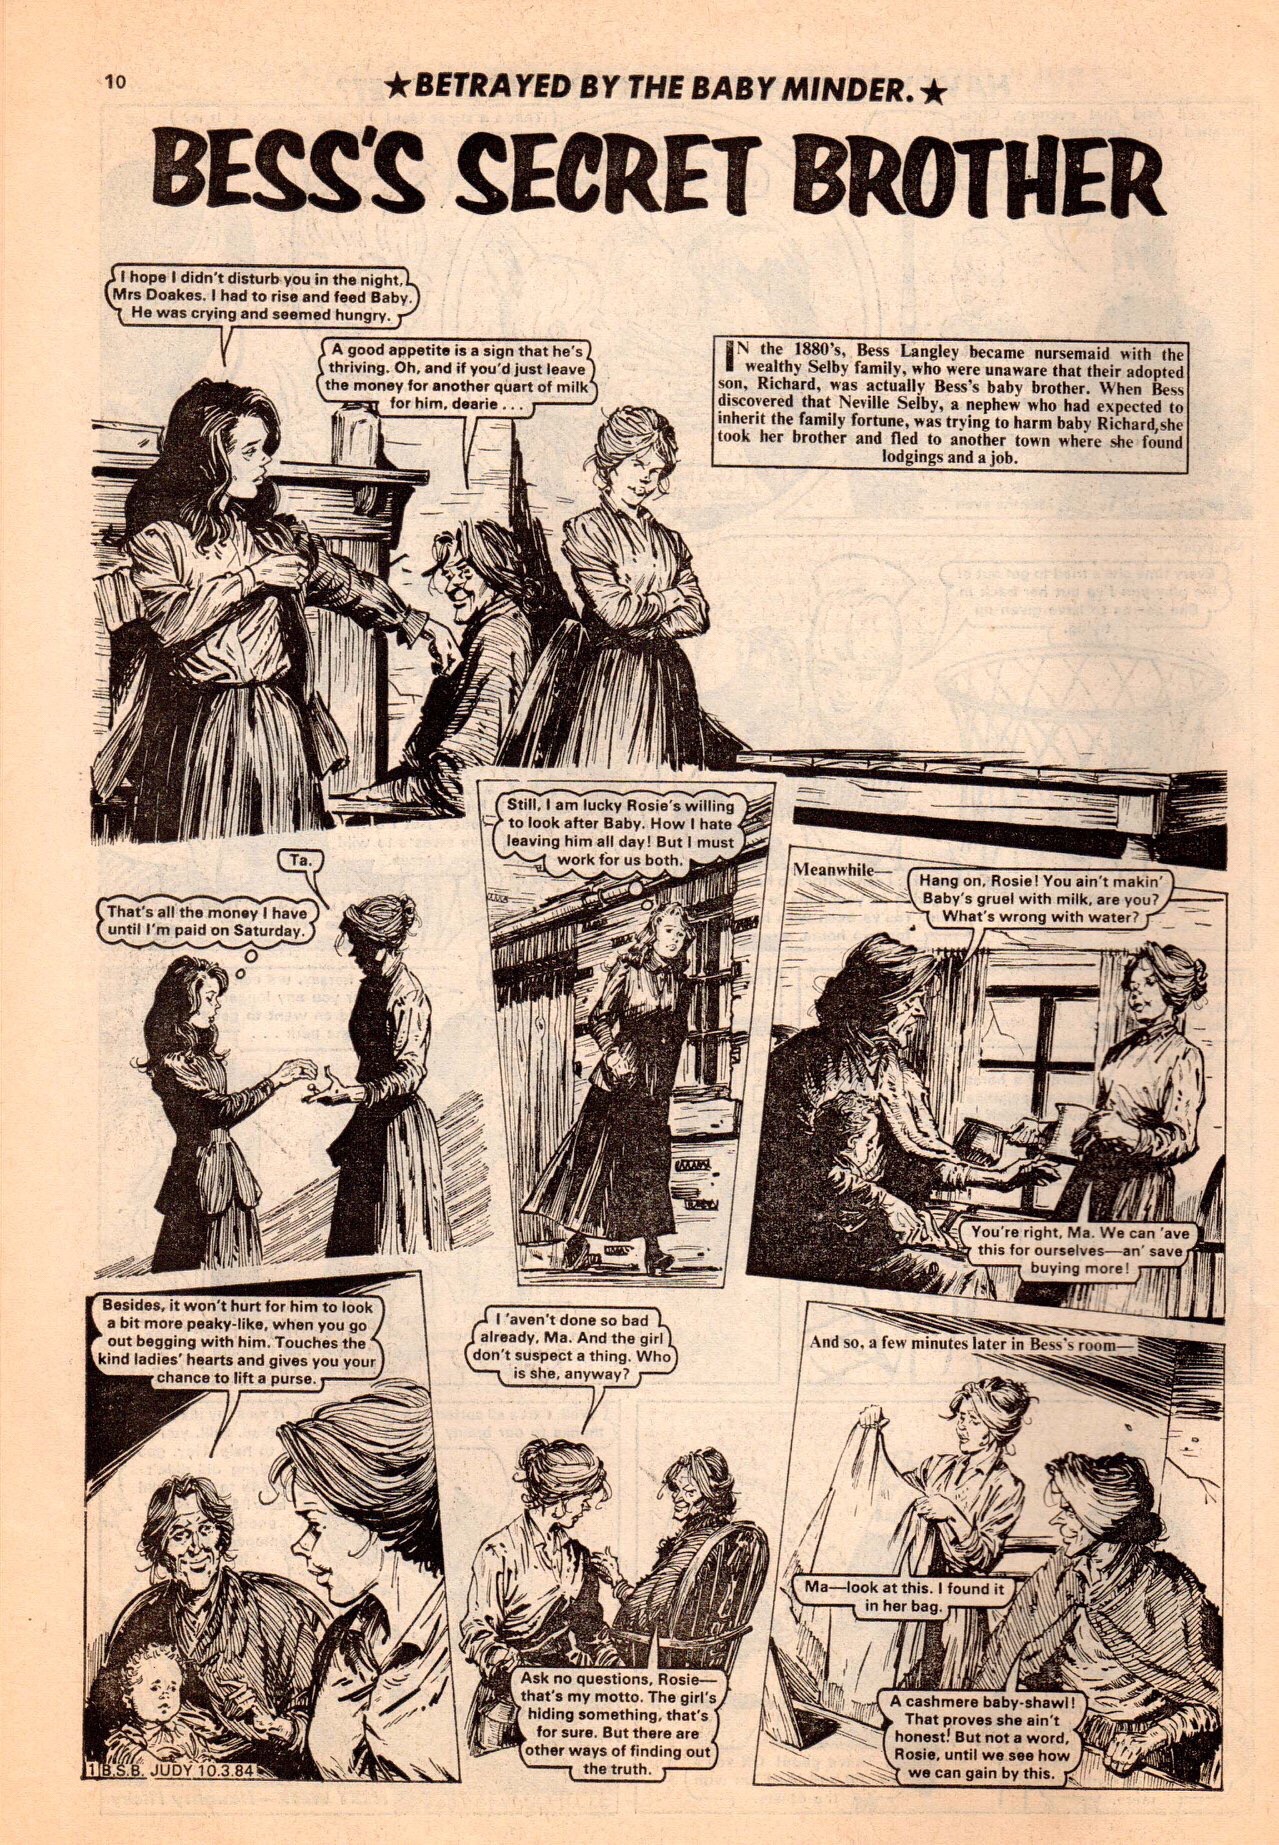 "Bess's Secret Brother" , a strip for Judy published in the 1980s. Artist unknown